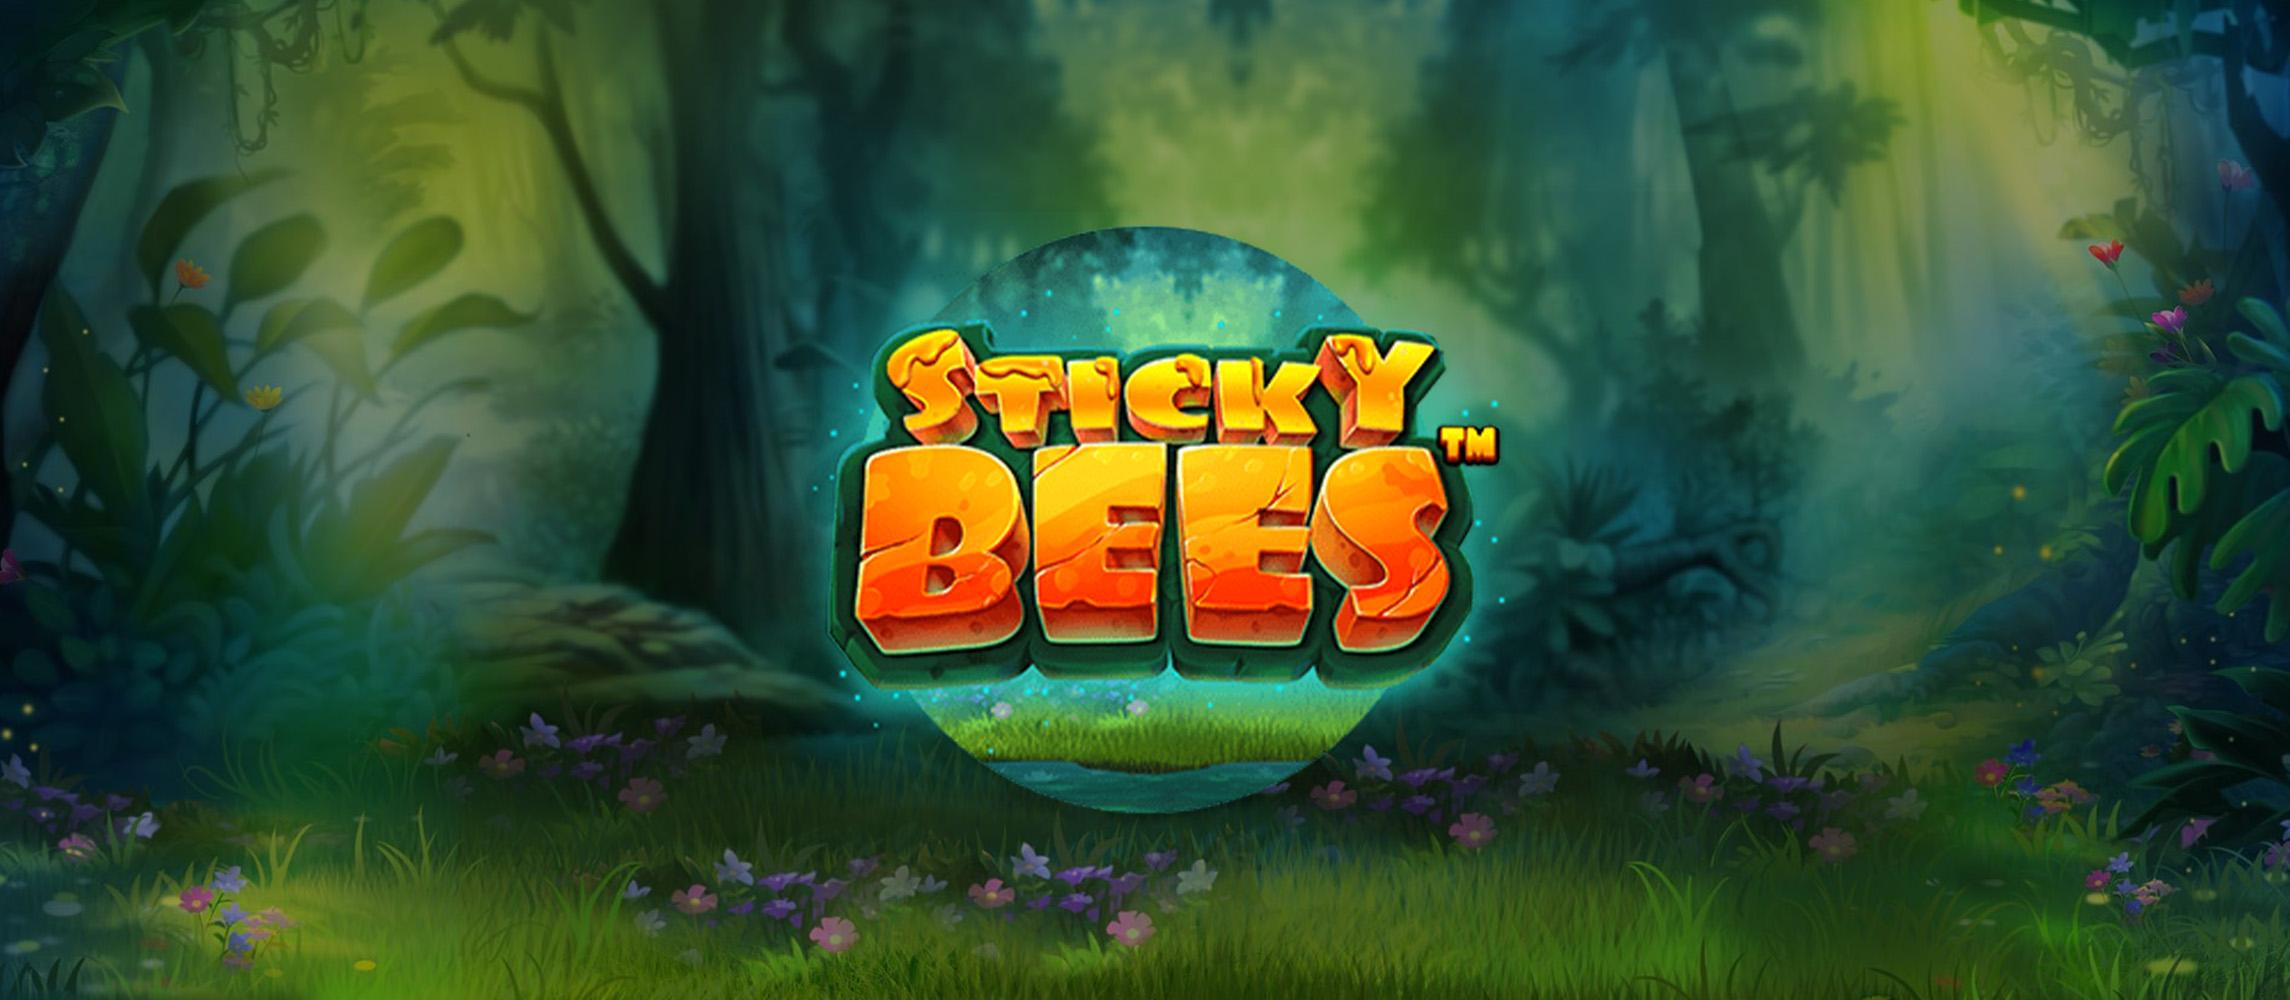 Sticky Bees brings free spins and Super Wilds for big wins.